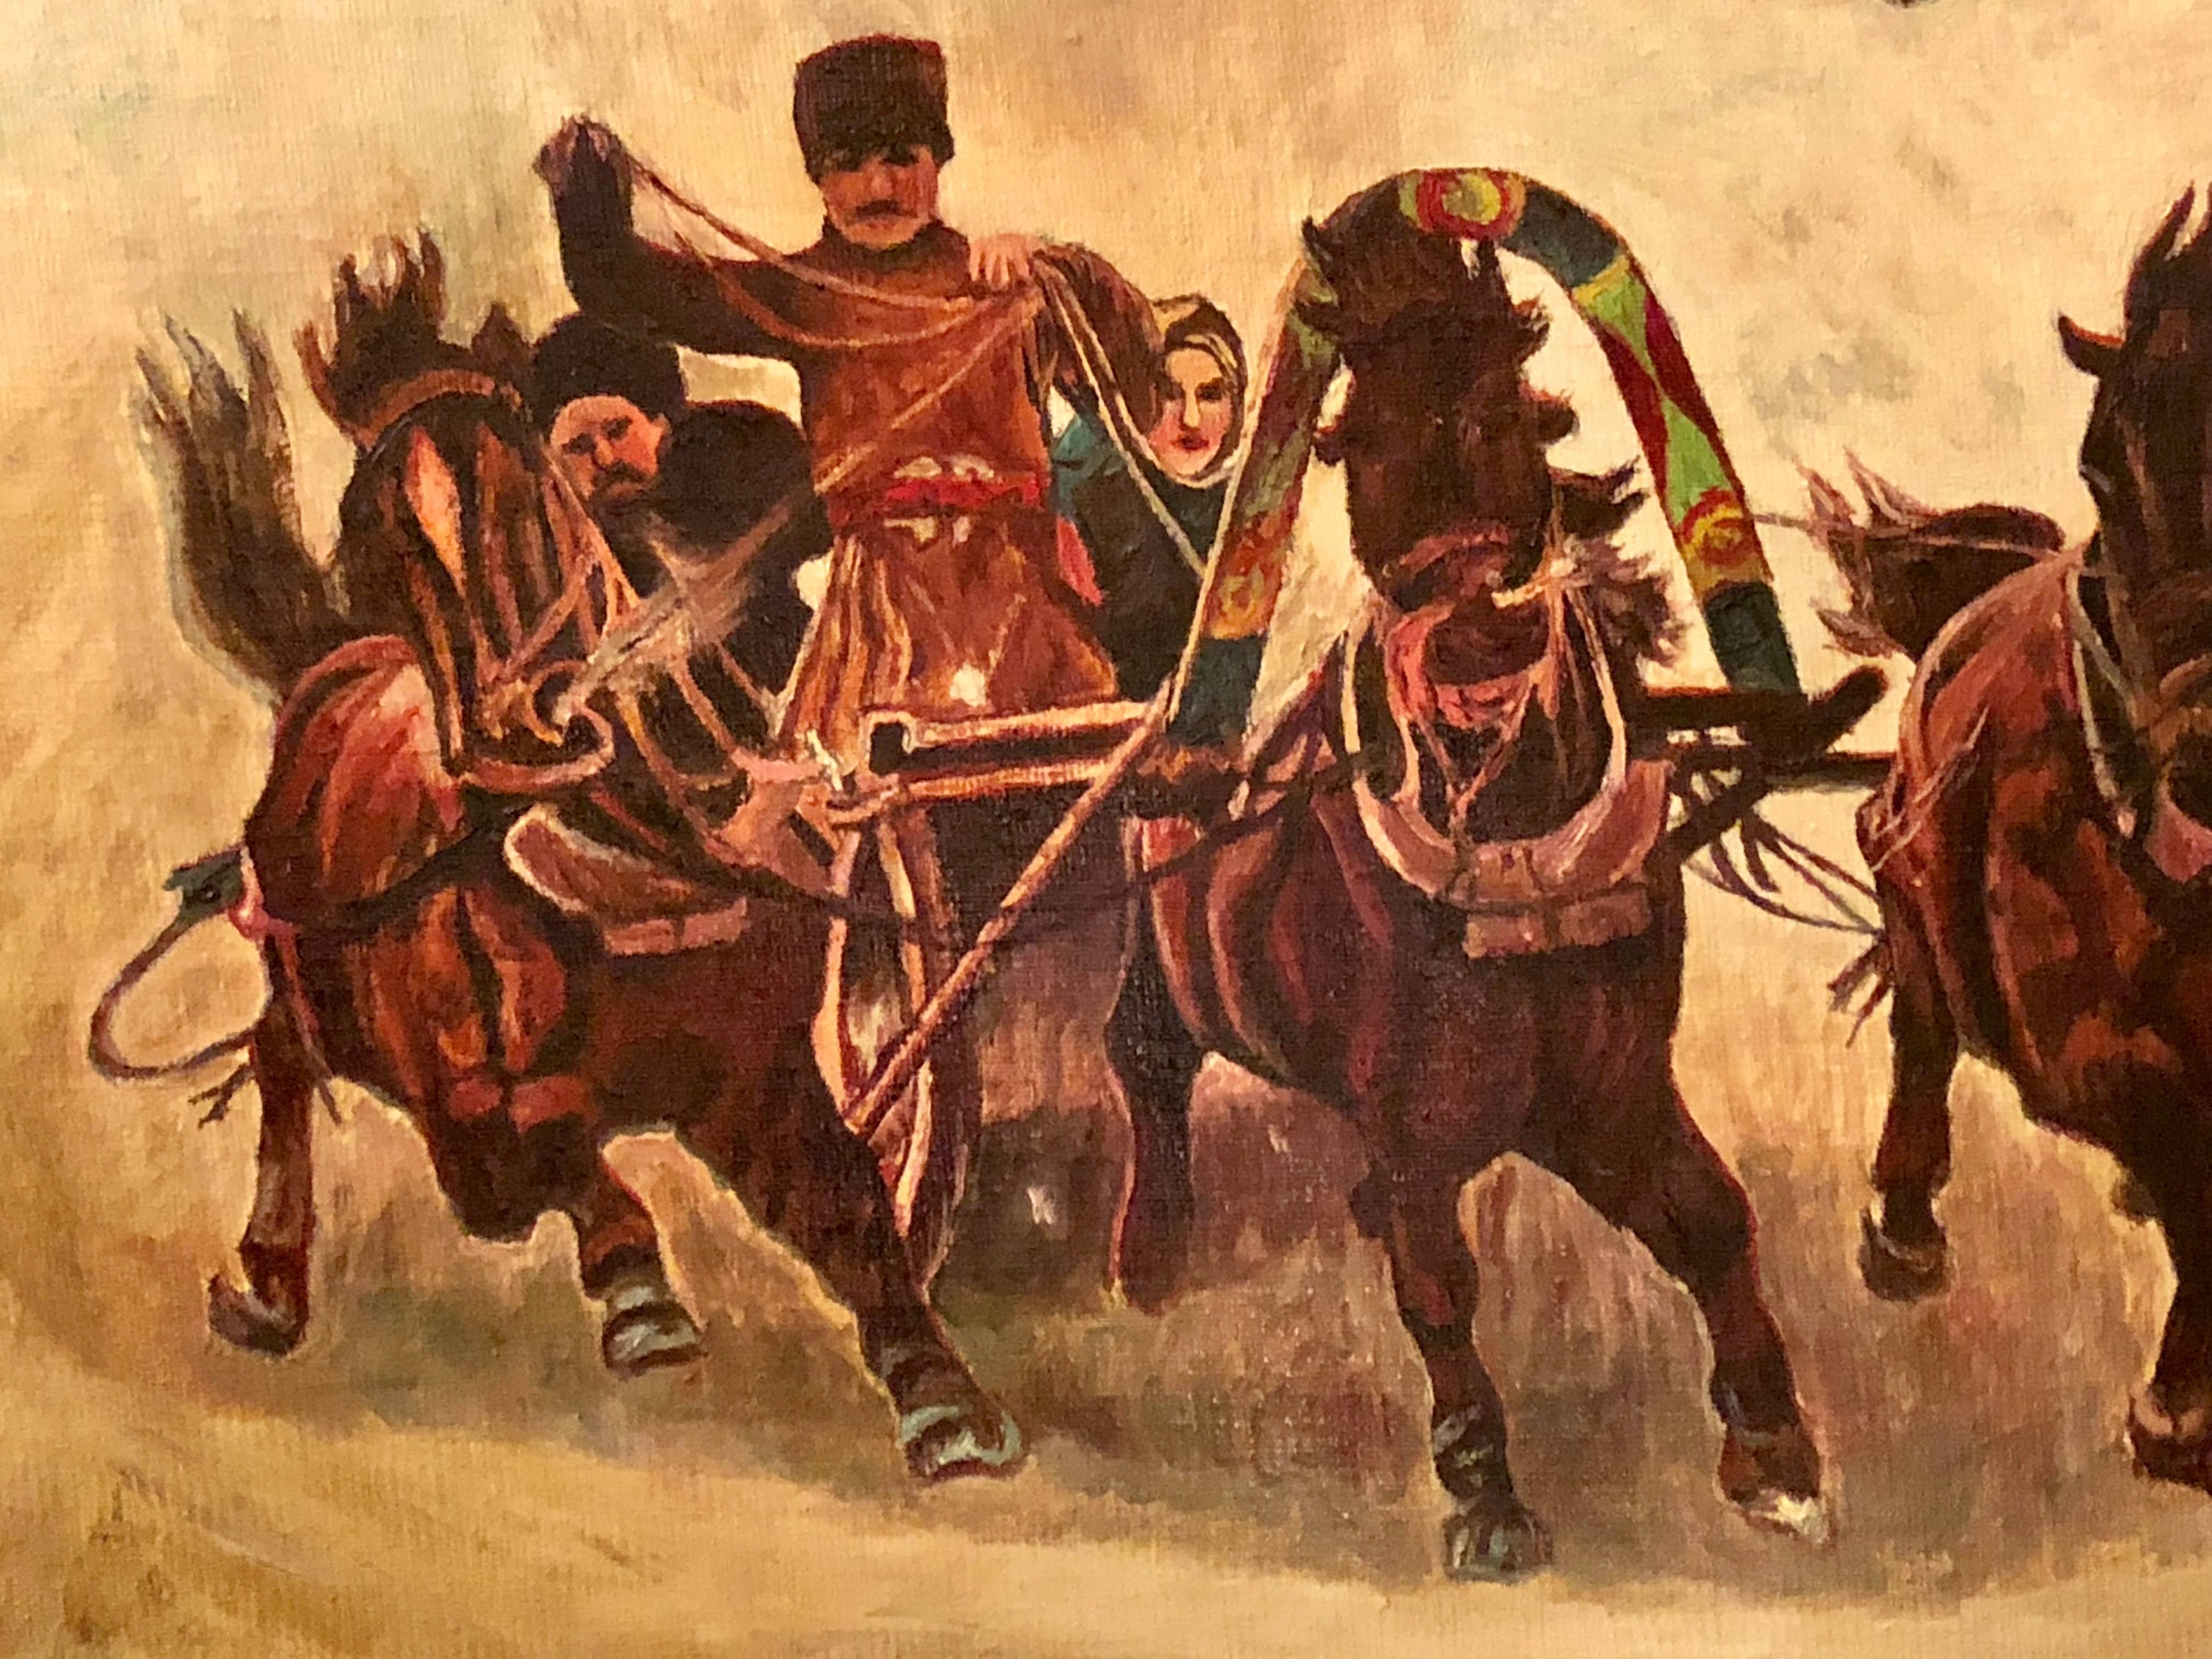 20th Century Oil on Canvas of a Russian Racing Scene in the Snow by Ivan Tschernikow